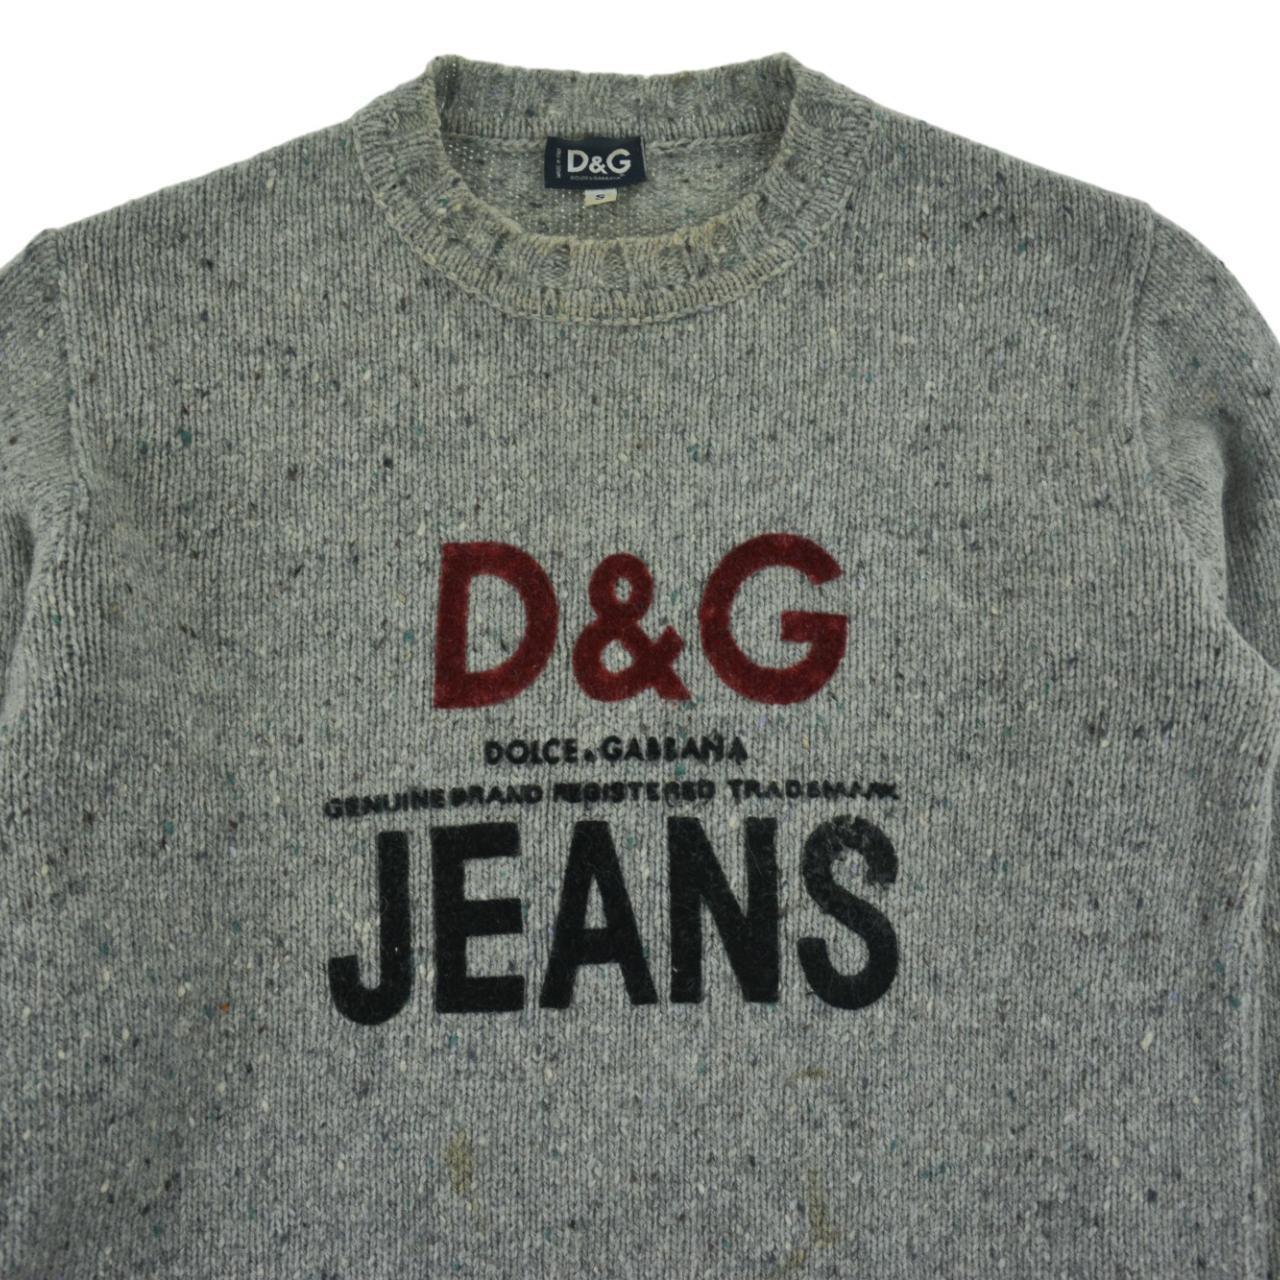 Vintage Dolce and Gabbana Knitted Jumper Woman’s Size S - Known Source